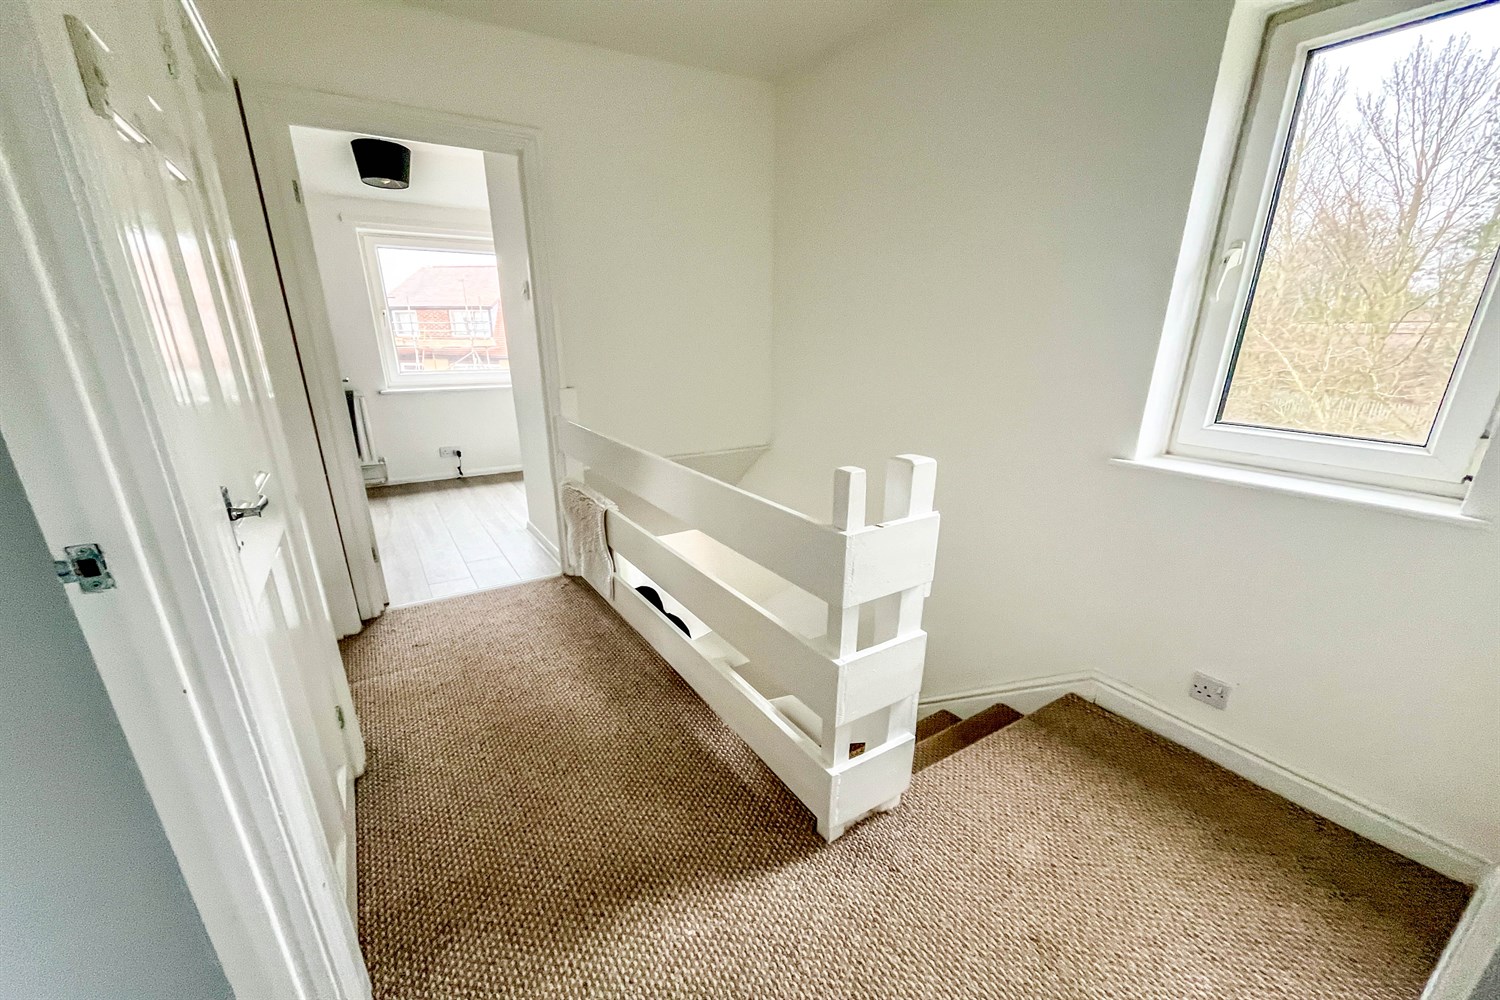 3 bed end of terraced town house for sale in Lune Green, Jarrow  - Property Image 10